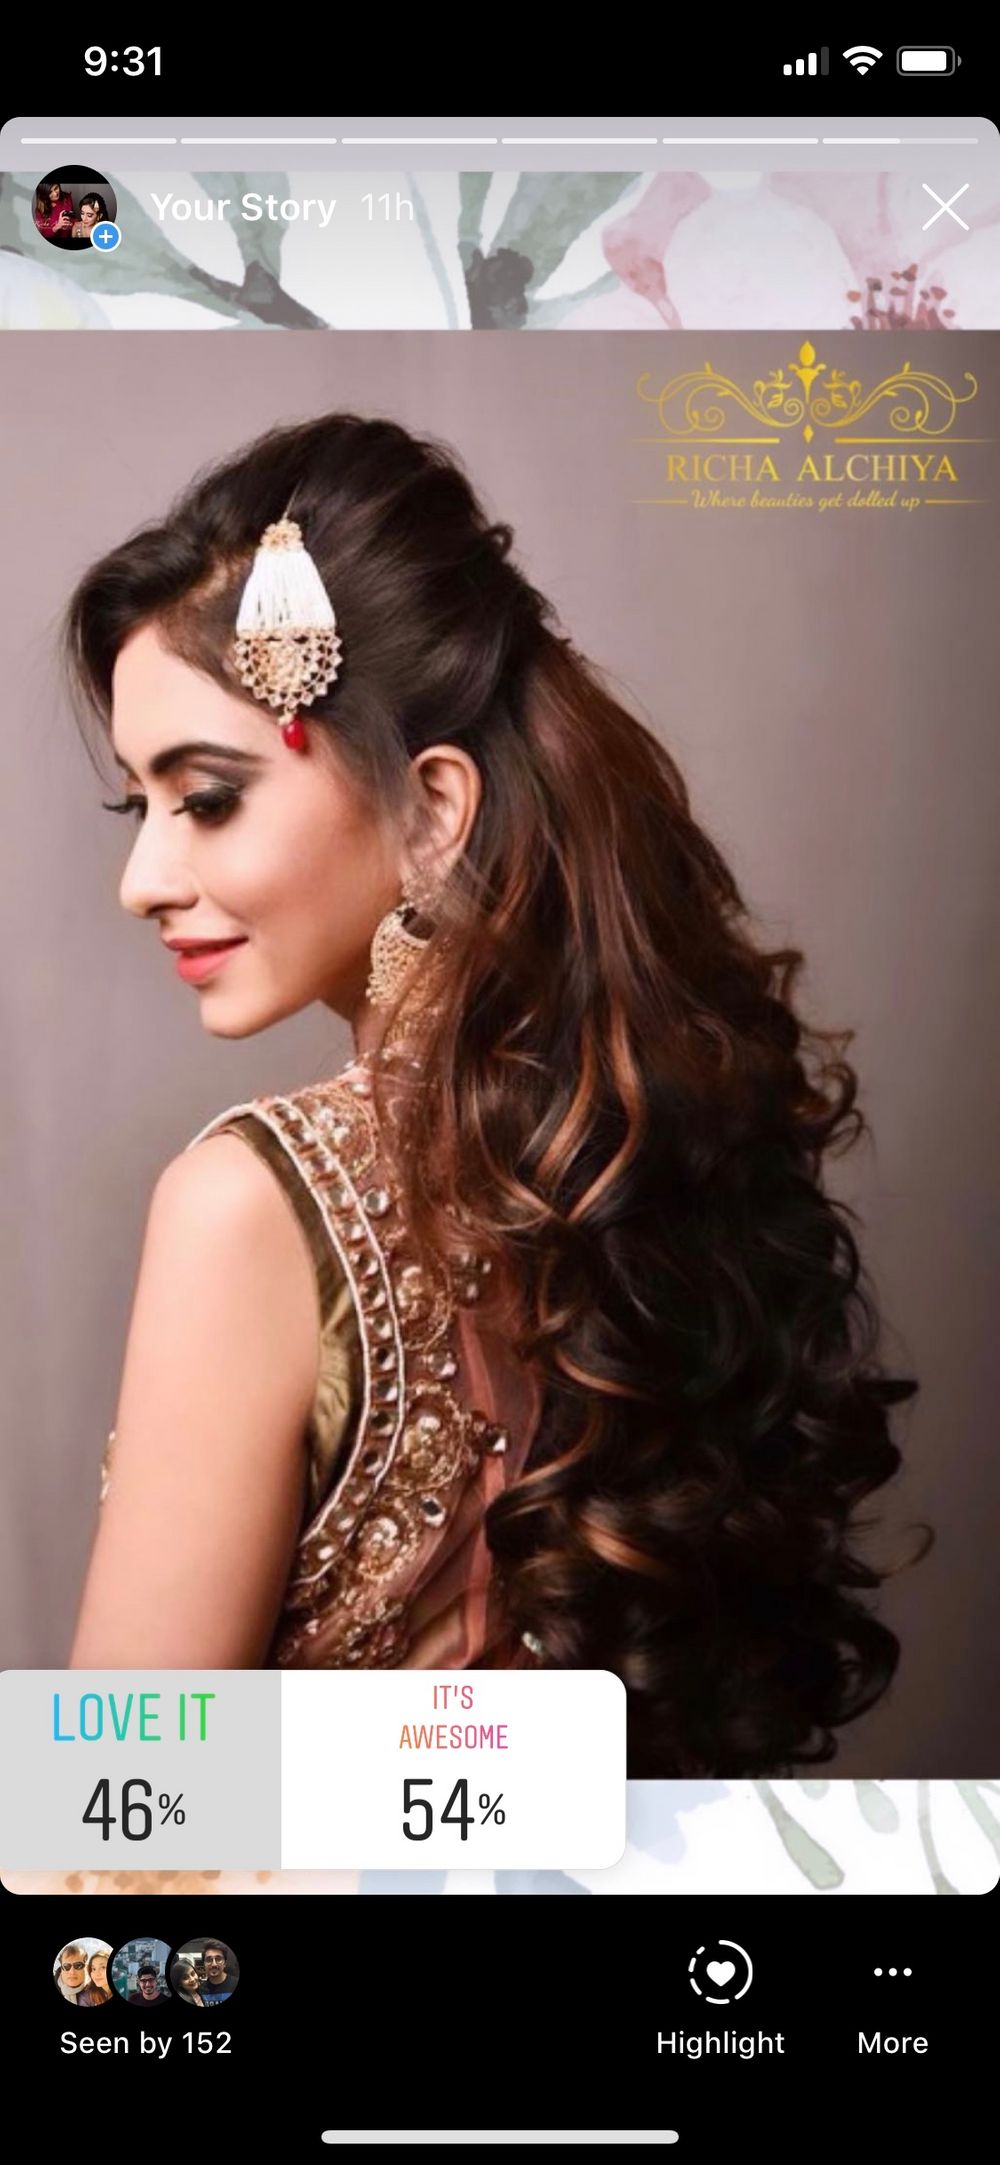 Photo From Best R.A Hairstyles - By Richa Alchiya Makeup Artist and Hairstylist